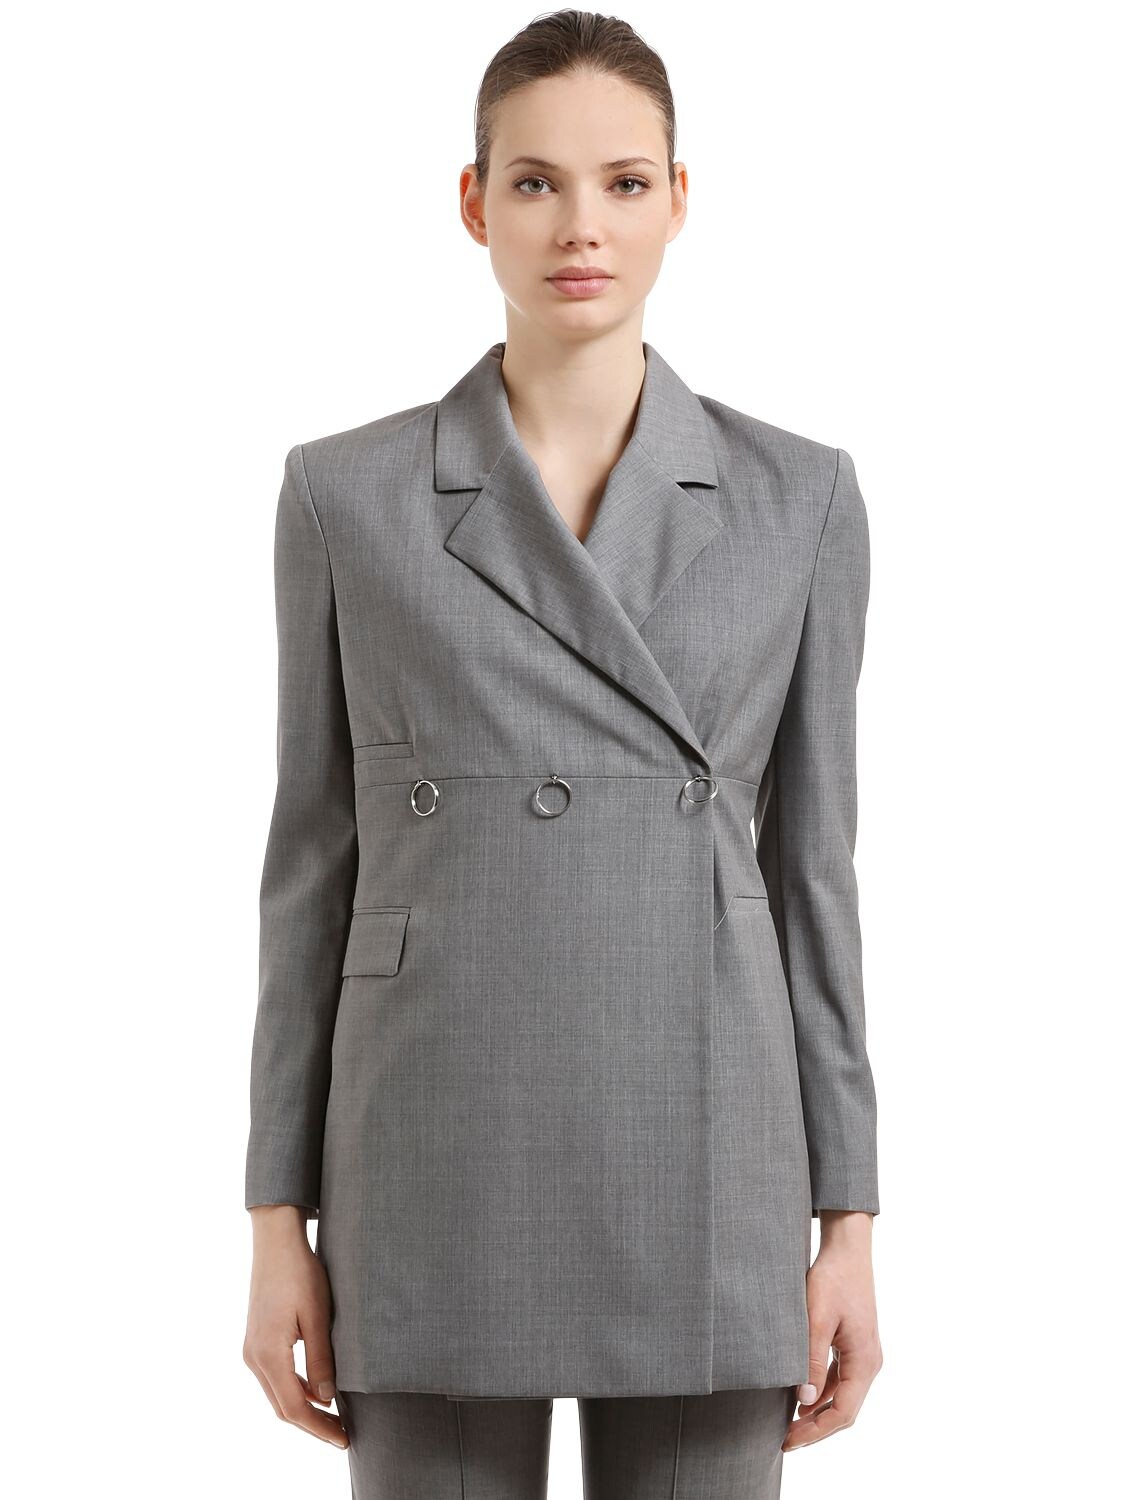 ALYX DOUBLE BREASTED TAILORED WOOL BLAZER,67IVRH037-MDAy0